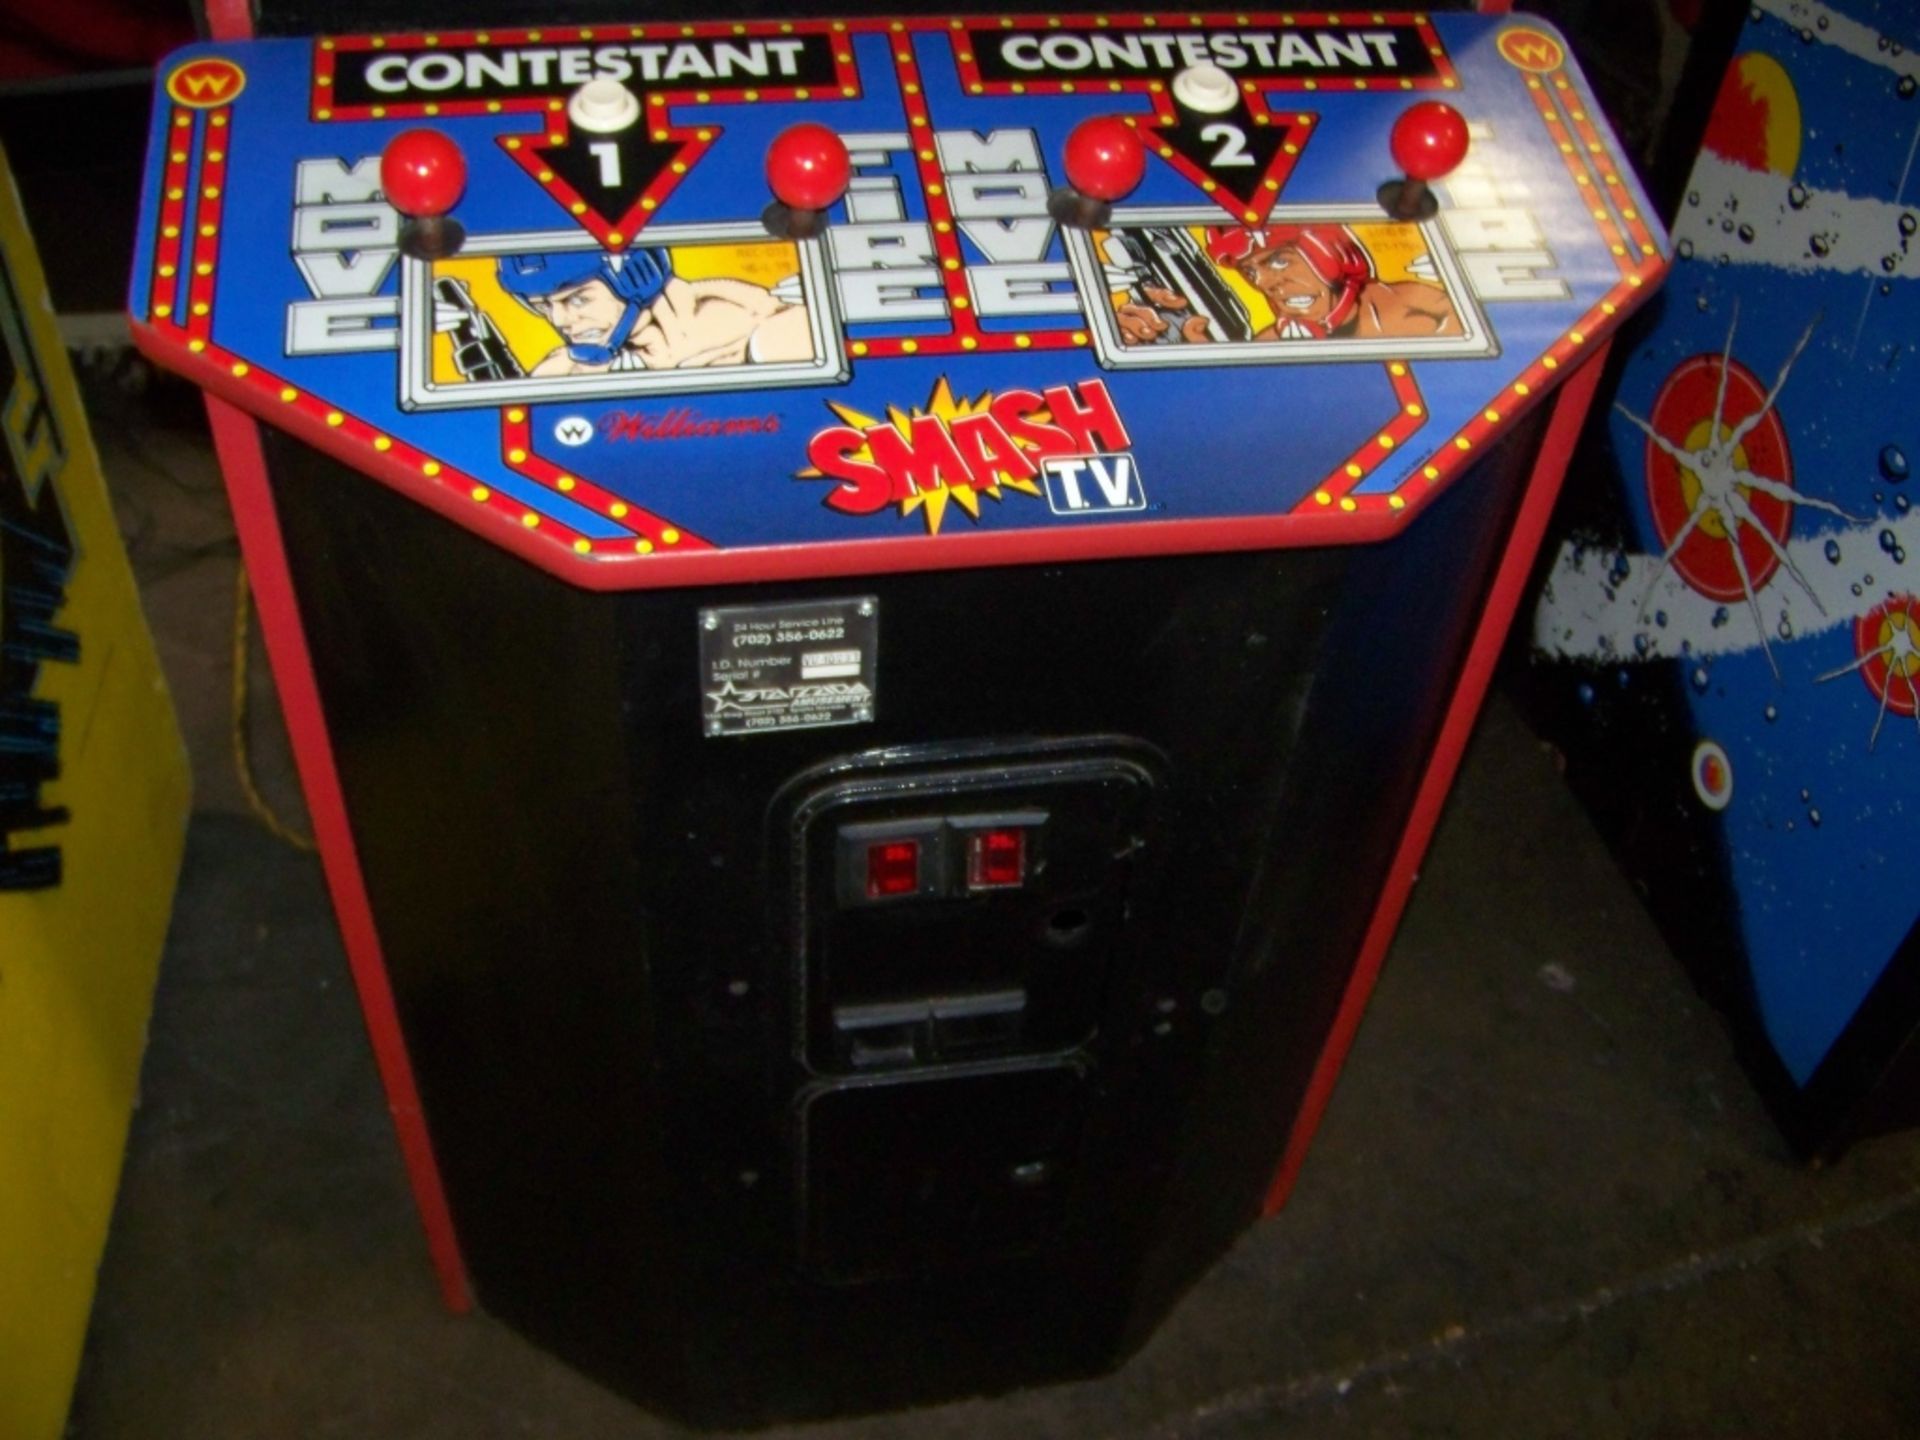 SMASH TV CLASSIC ARCADE GAME WILLIAMS Item is in used condition. Evidence of wear and commercial - Image 3 of 9